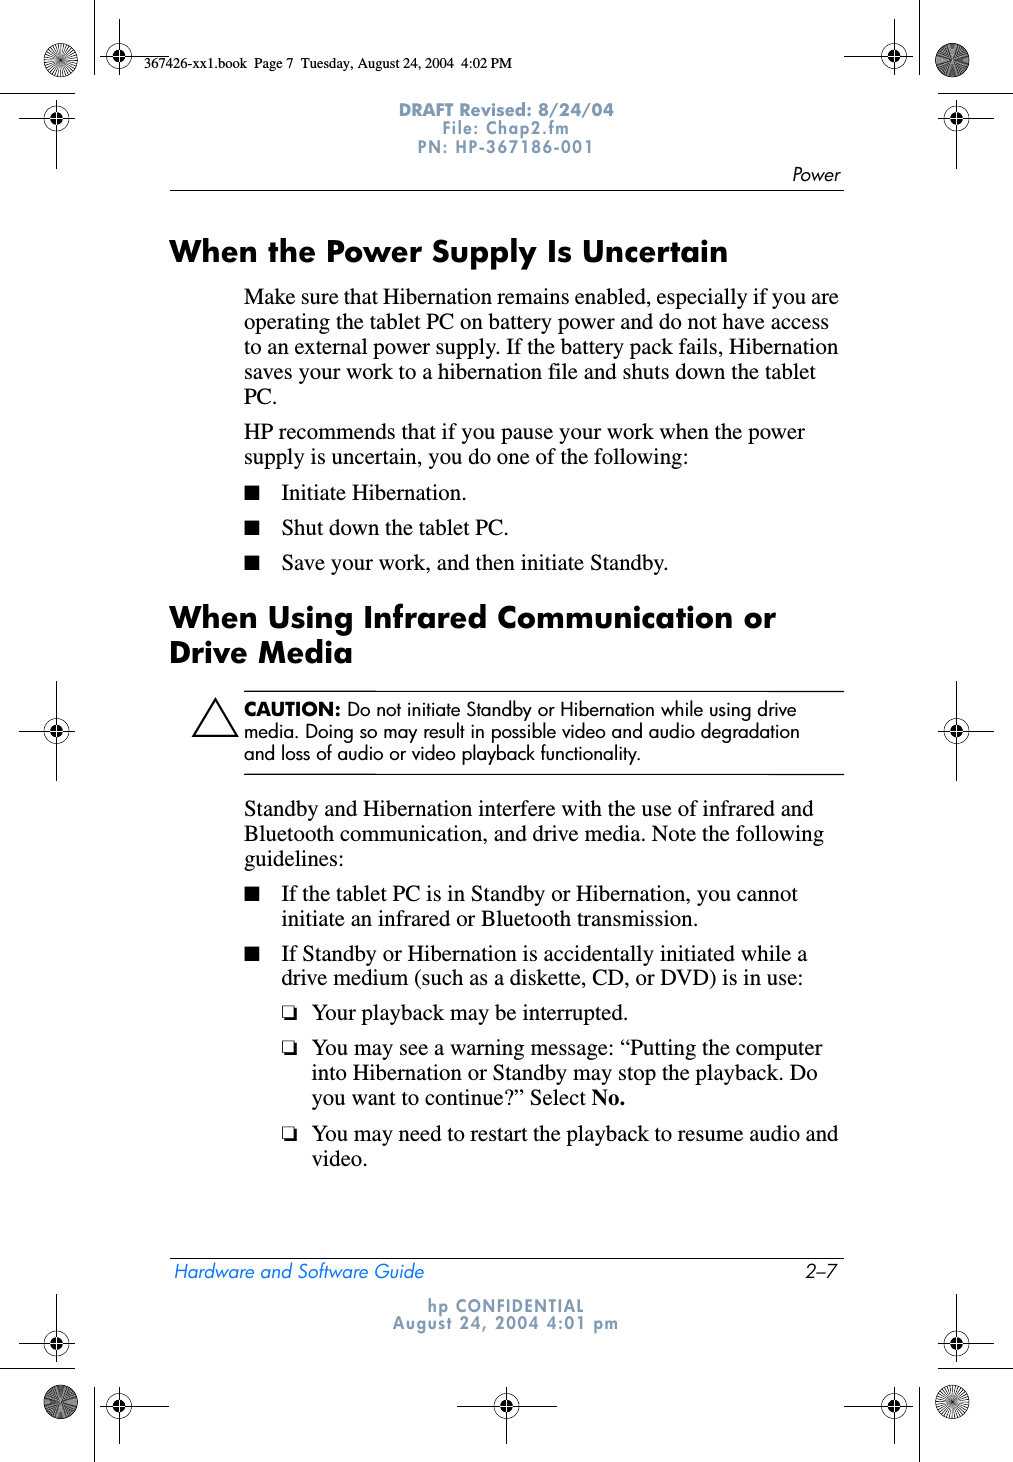 PowerHardware and Software Guide 2–7DRAFT Revised: 8/24/04File: Chap2.fm PN: HP-367186-001 hp CONFIDENTIALAugust 24, 2004 4:01 pmWhen the Power Supply Is UncertainMake sure that Hibernation remains enabled, especially if you are operating the tablet PC on battery power and do not have access to an external power supply. If the battery pack fails, Hibernation saves your work to a hibernation file and shuts down the tablet PC.HP recommends that if you pause your work when the power supply is uncertain, you do one of the following:■Initiate Hibernation.■Shut down the tablet PC.■Save your work, and then initiate Standby.When Using Infrared Communication or Drive MediaÄCAUTION: Do not initiate Standby or Hibernation while using drive media. Doing so may result in possible video and audio degradation and loss of audio or video playback functionality.Standby and Hibernation interfere with the use of infrared and Bluetooth communication, and drive media. Note the following guidelines:■If the tablet PC is in Standby or Hibernation, you cannot initiate an infrared or Bluetooth transmission.■If Standby or Hibernation is accidentally initiated while a drive medium (such as a diskette, CD, or DVD) is in use:❏Your playback may be interrupted.❏You may see a warning message: “Putting the computer into Hibernation or Standby may stop the playback. Do you want to continue?” Select No.❏You may need to restart the playback to resume audio and video.367426-xx1.book  Page 7  Tuesday, August 24, 2004  4:02 PM